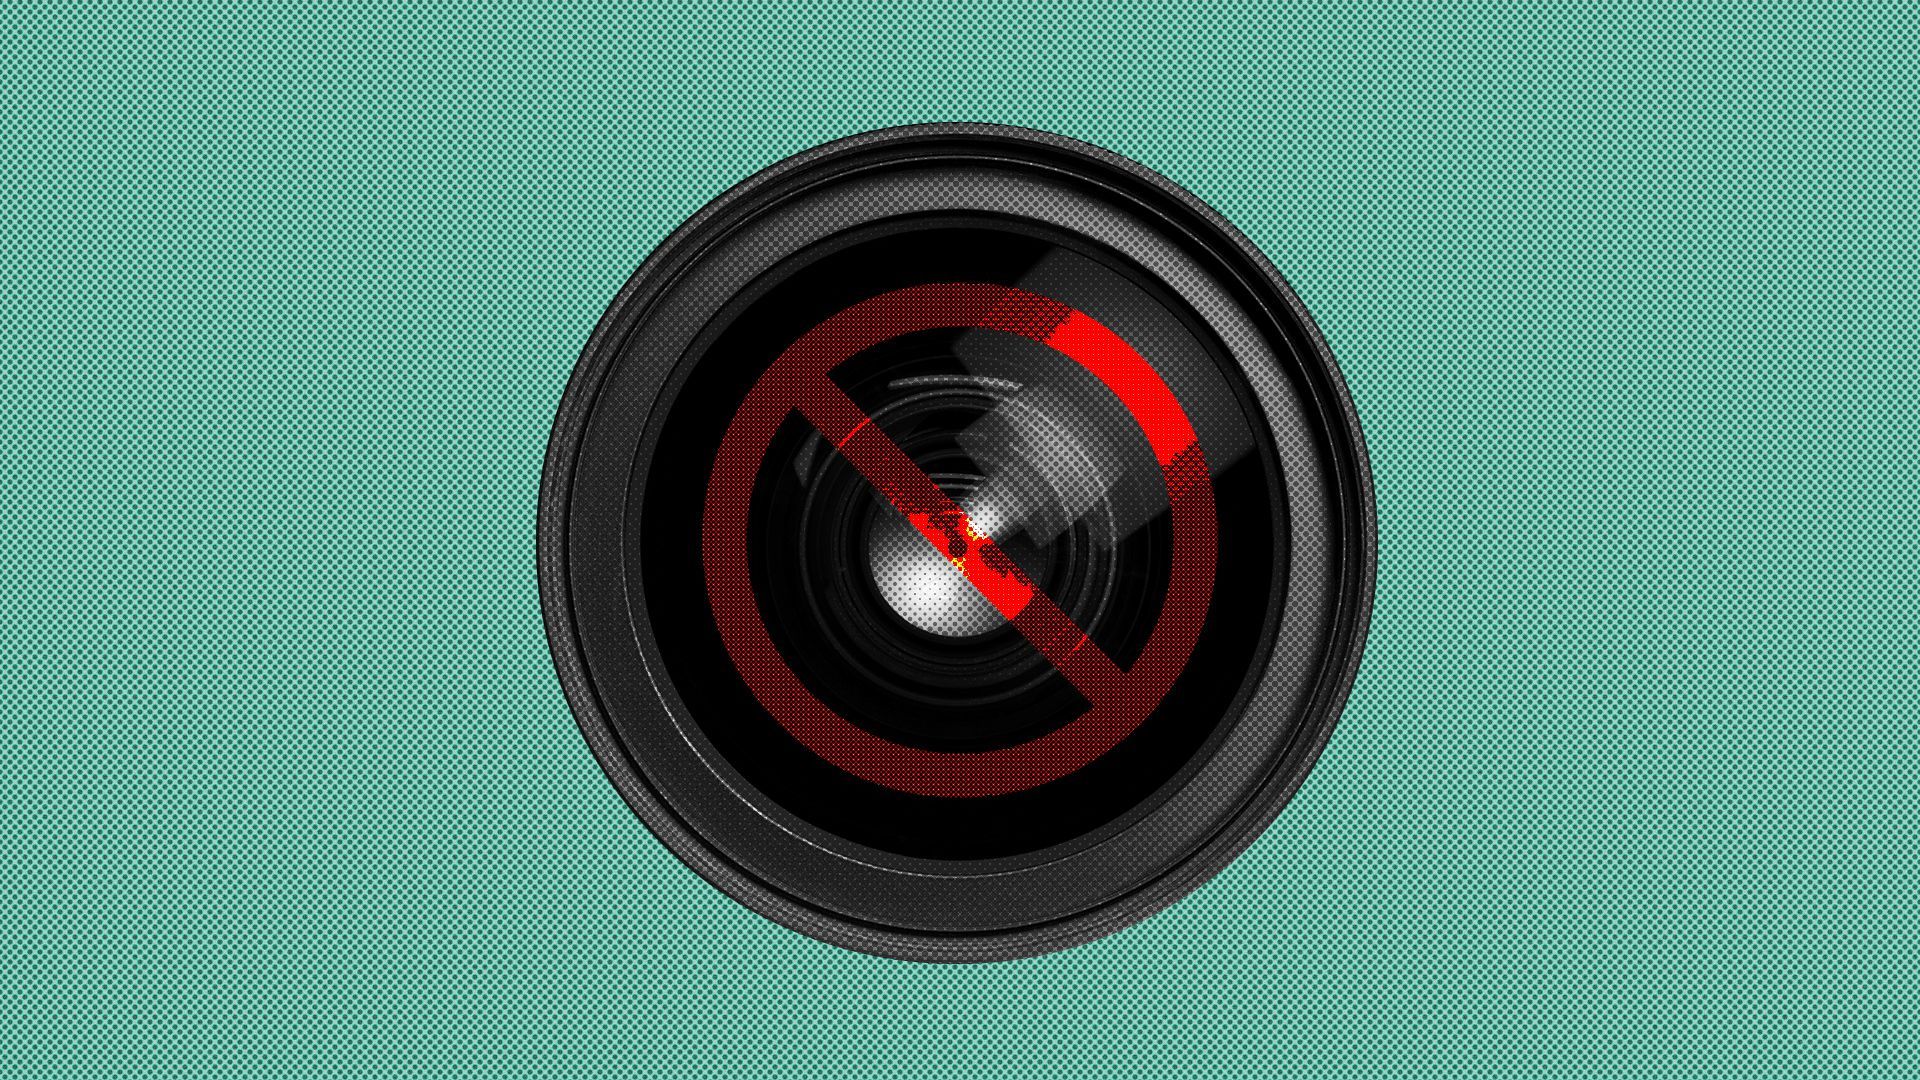 Illustration of a camera lens with a no symbol in the lens reflection